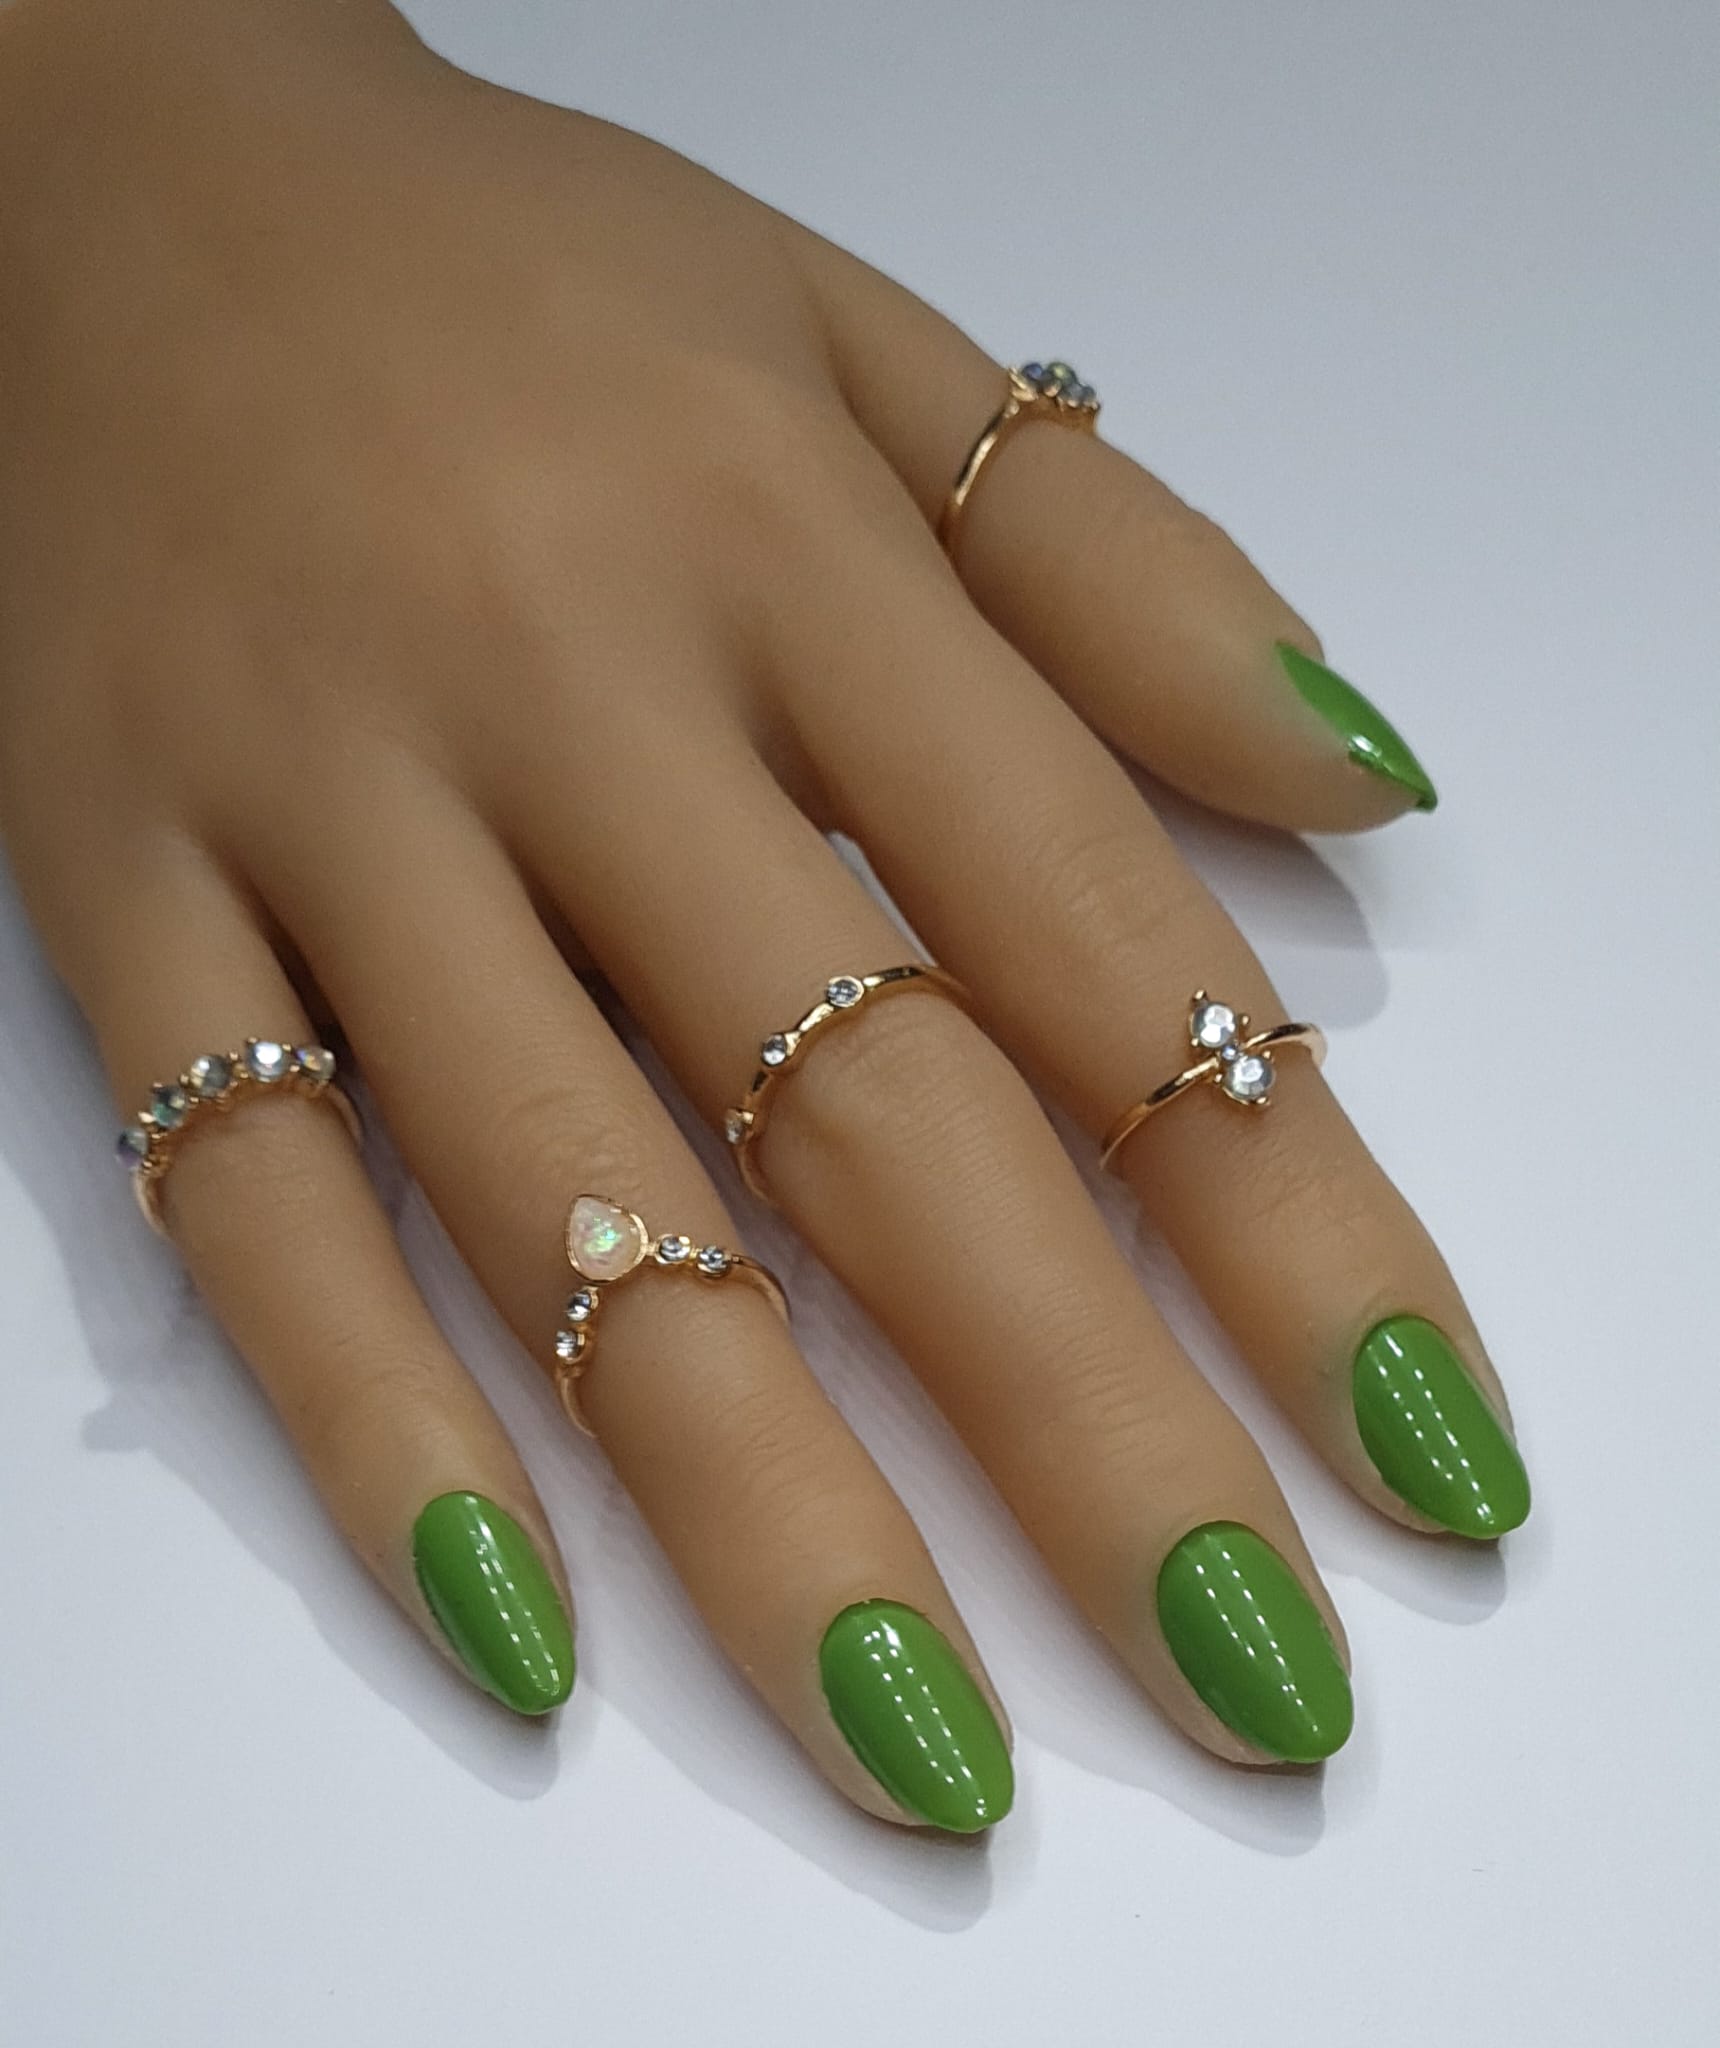 Press On Nails- Extra Short Almond Shaped Basic Grass Green Spring Summer Collection plain full cover gel tip luxury false nails salon quality hand painted custom made uk